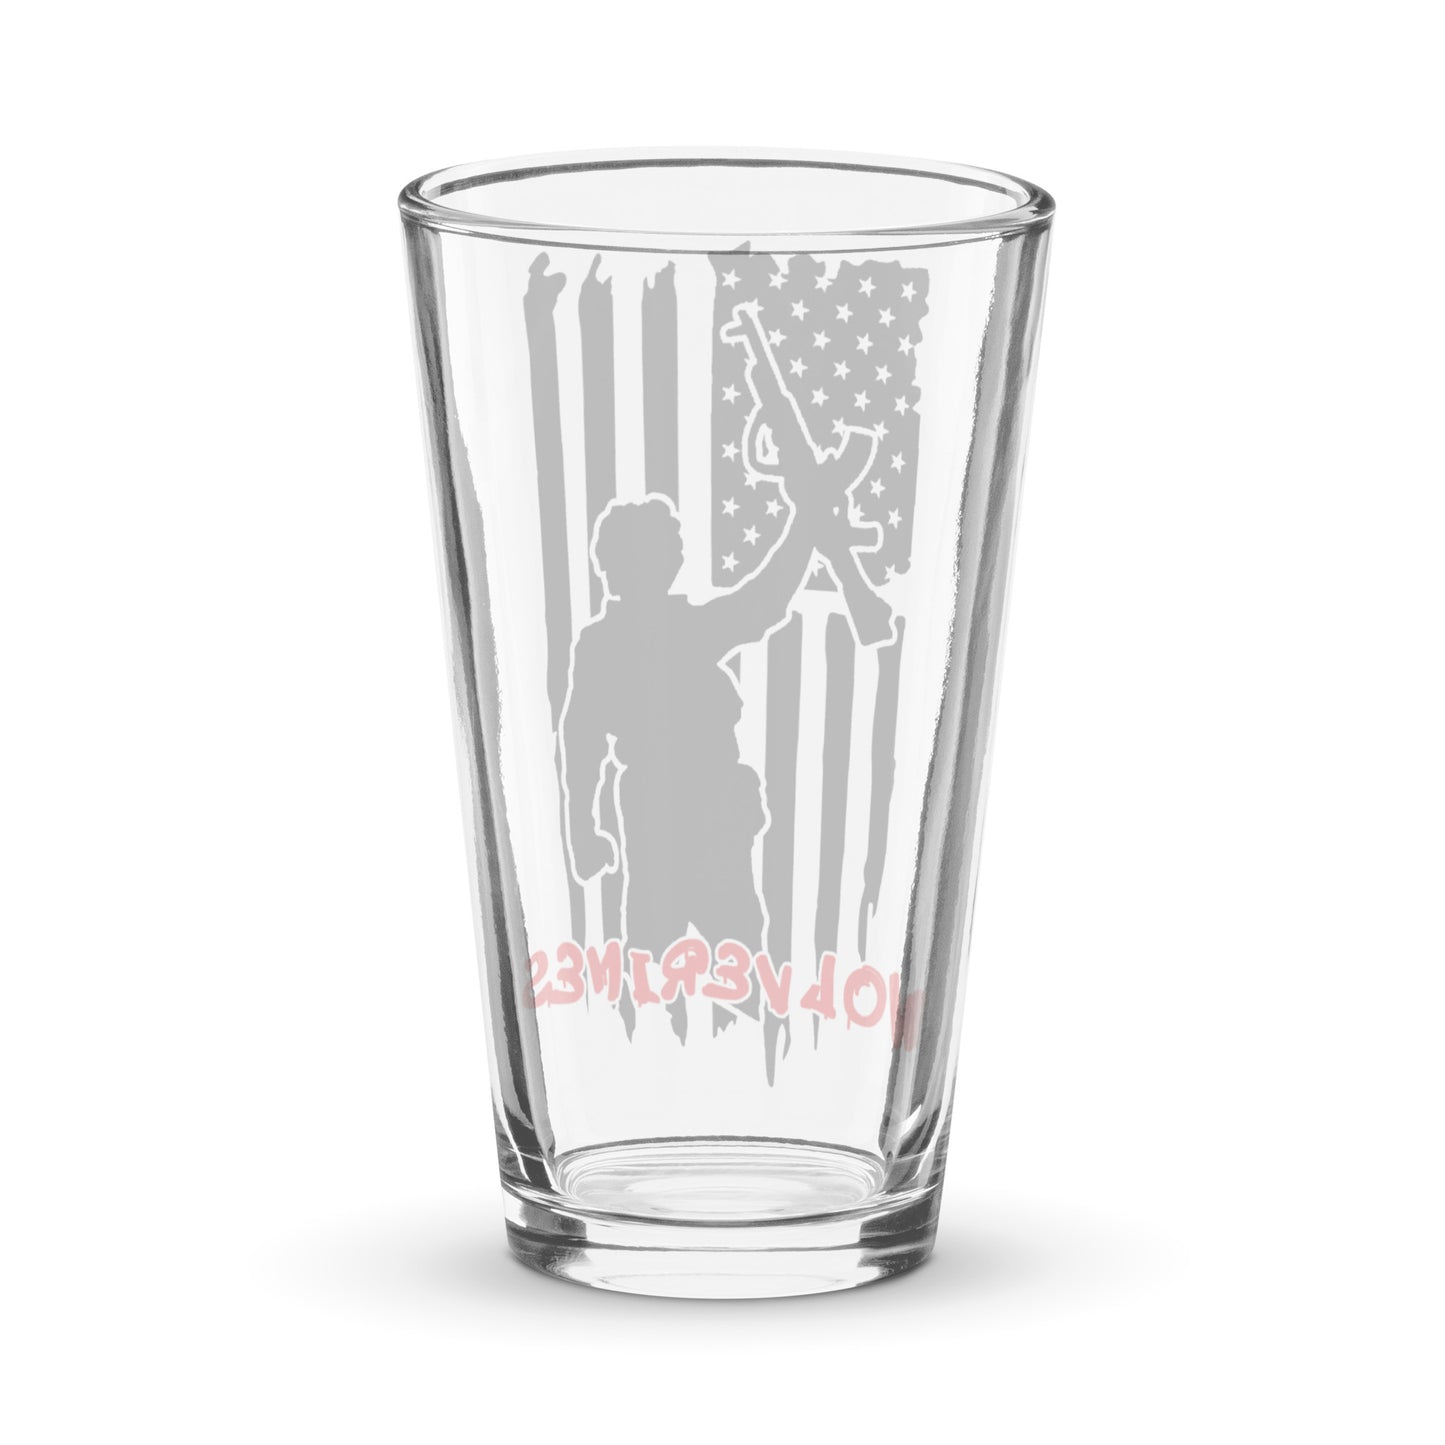 Wolverines pint glass